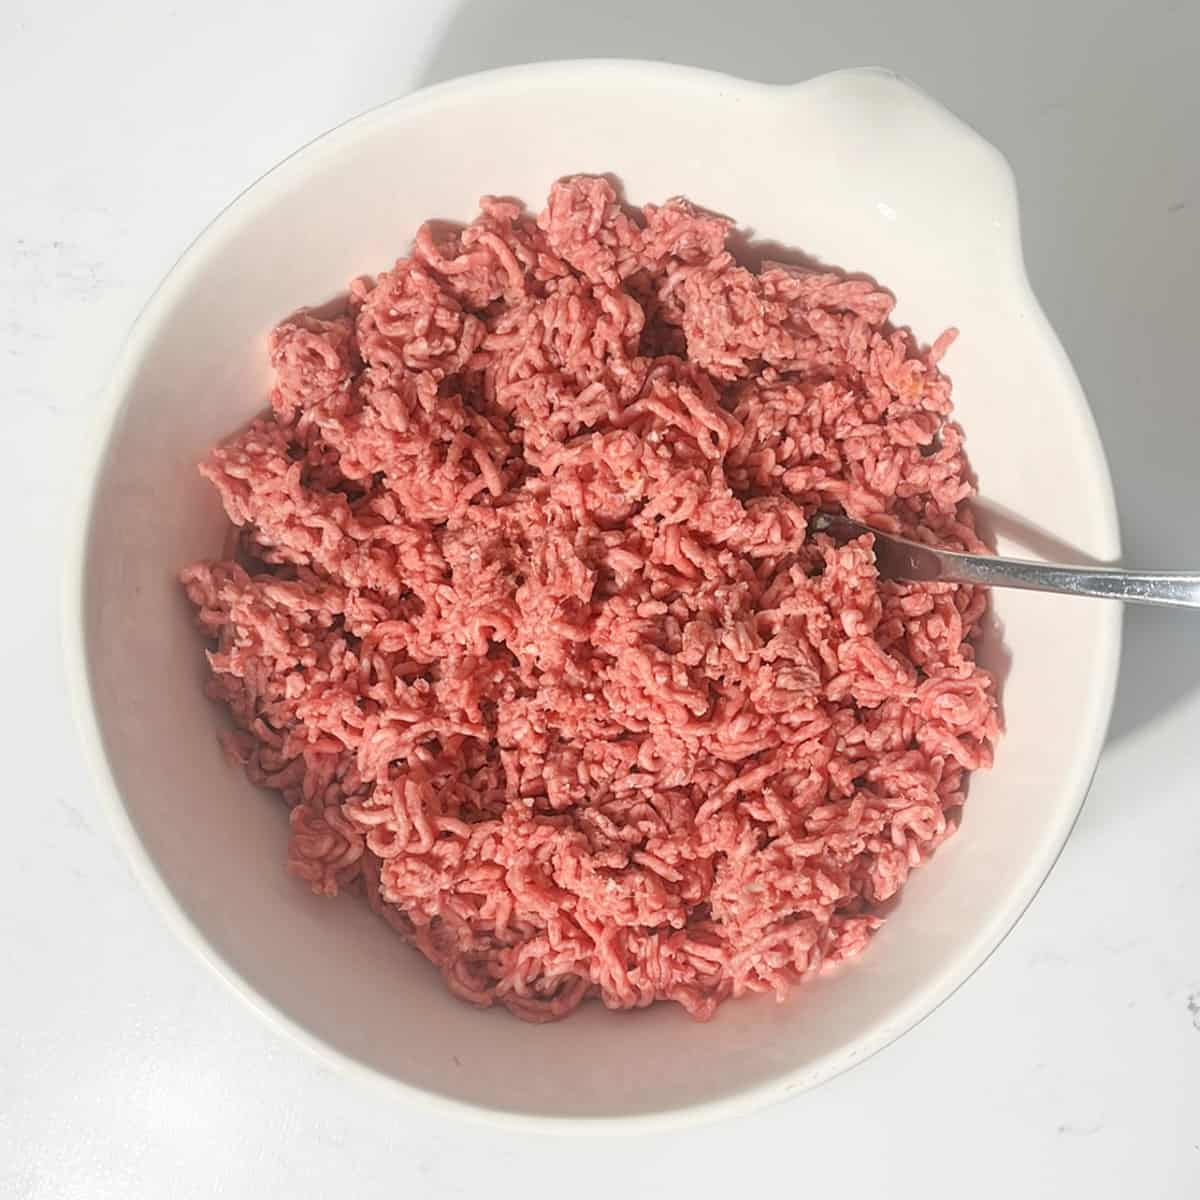 A bowl of mince.